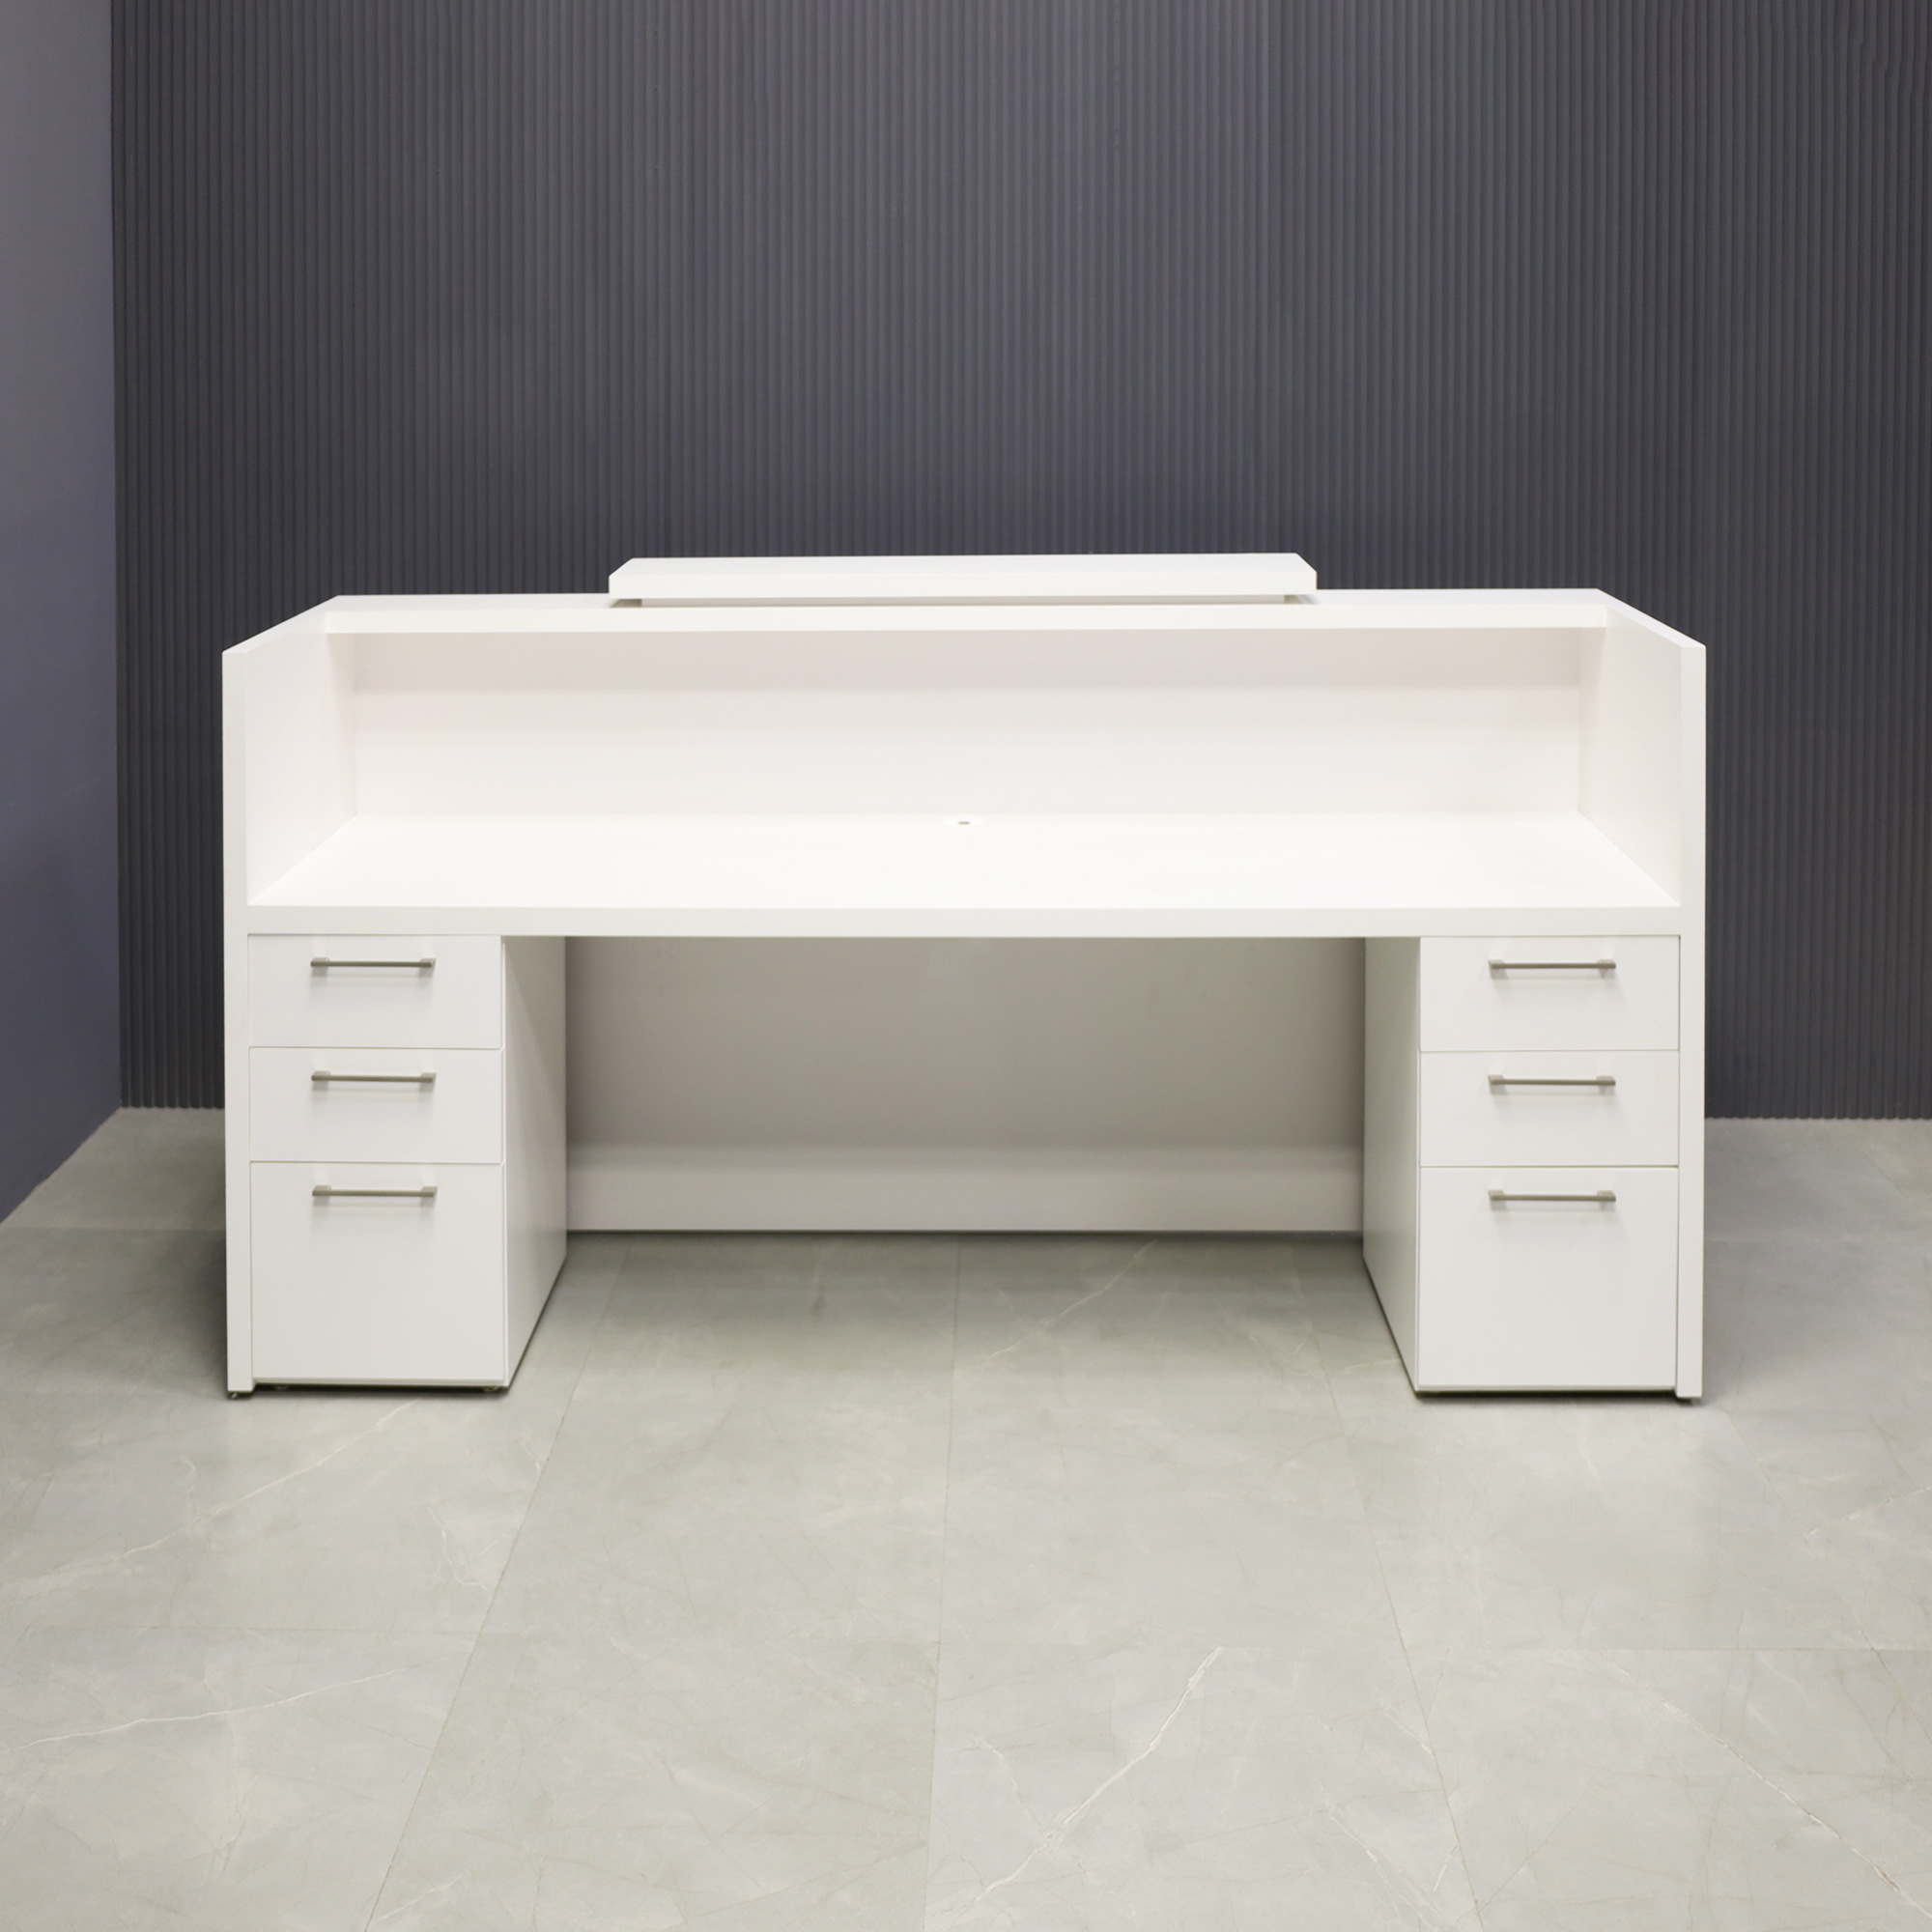 90-inch Chicago Custom Reception Desk in dover off-white matte laminate counter and desk, and two built-in storages, shown here.